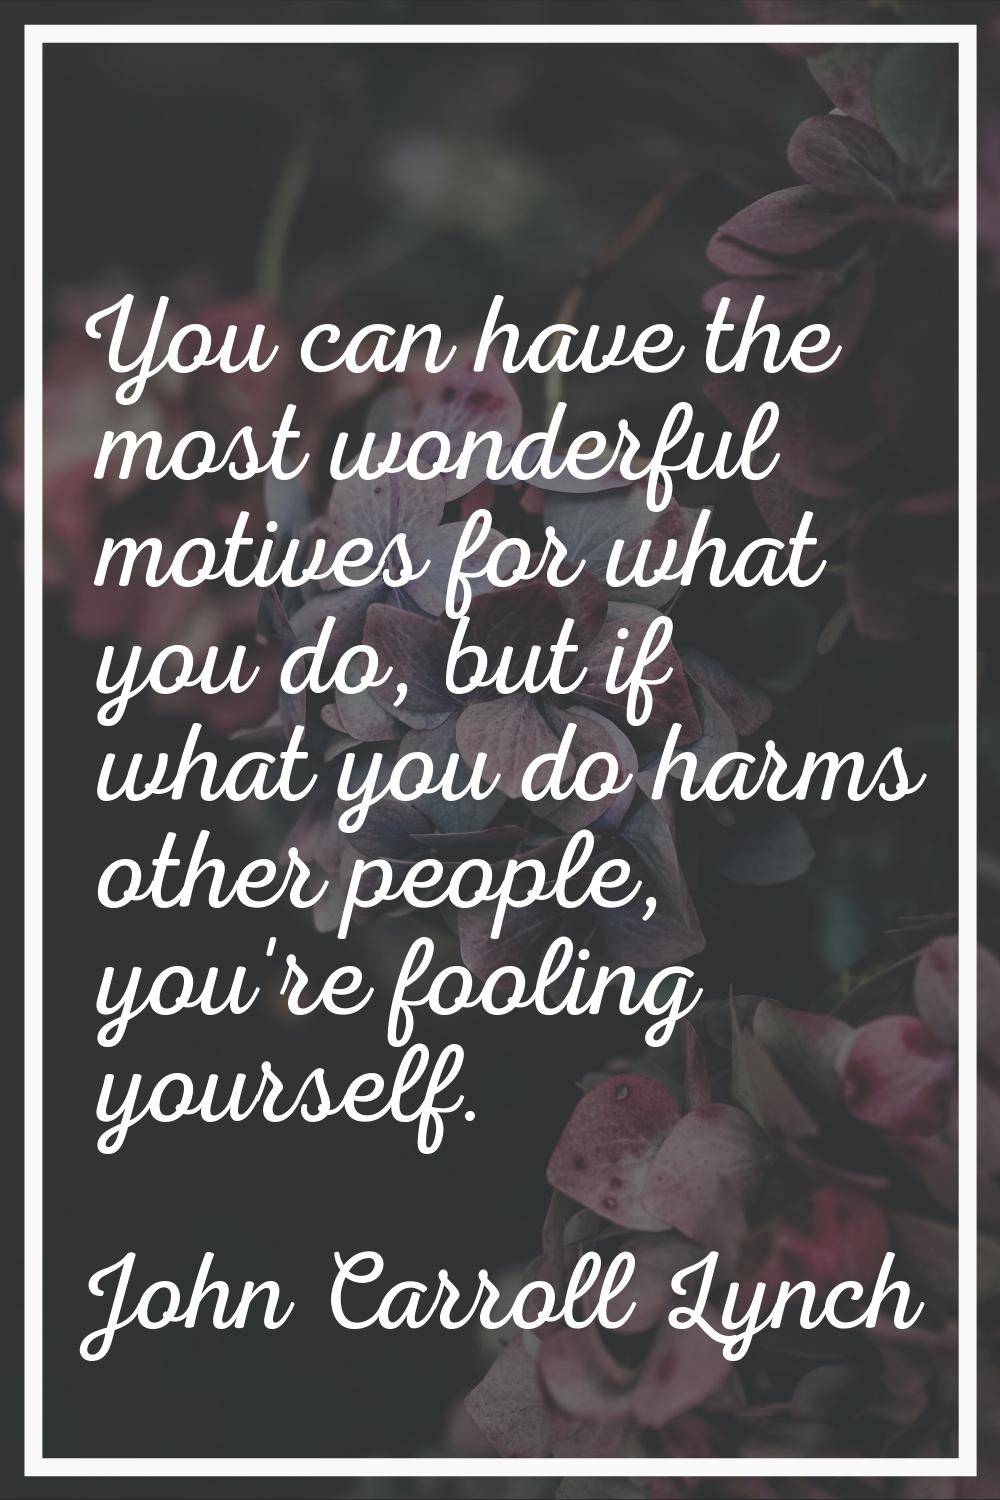 You can have the most wonderful motives for what you do, but if what you do harms other people, you